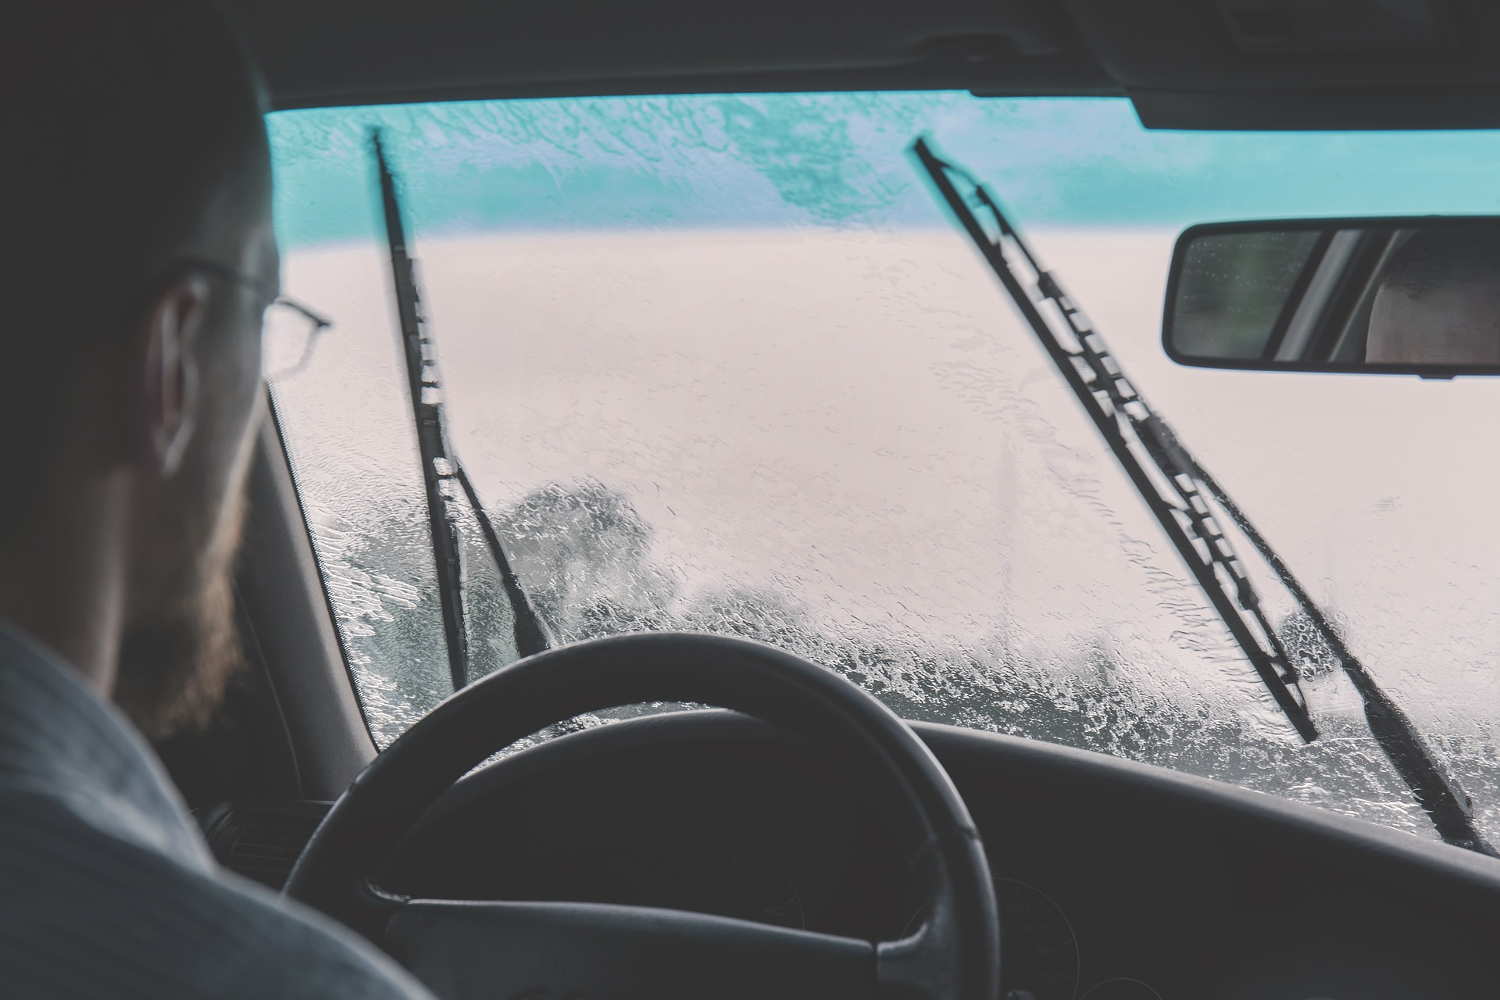 How To Change Windshield Wipers